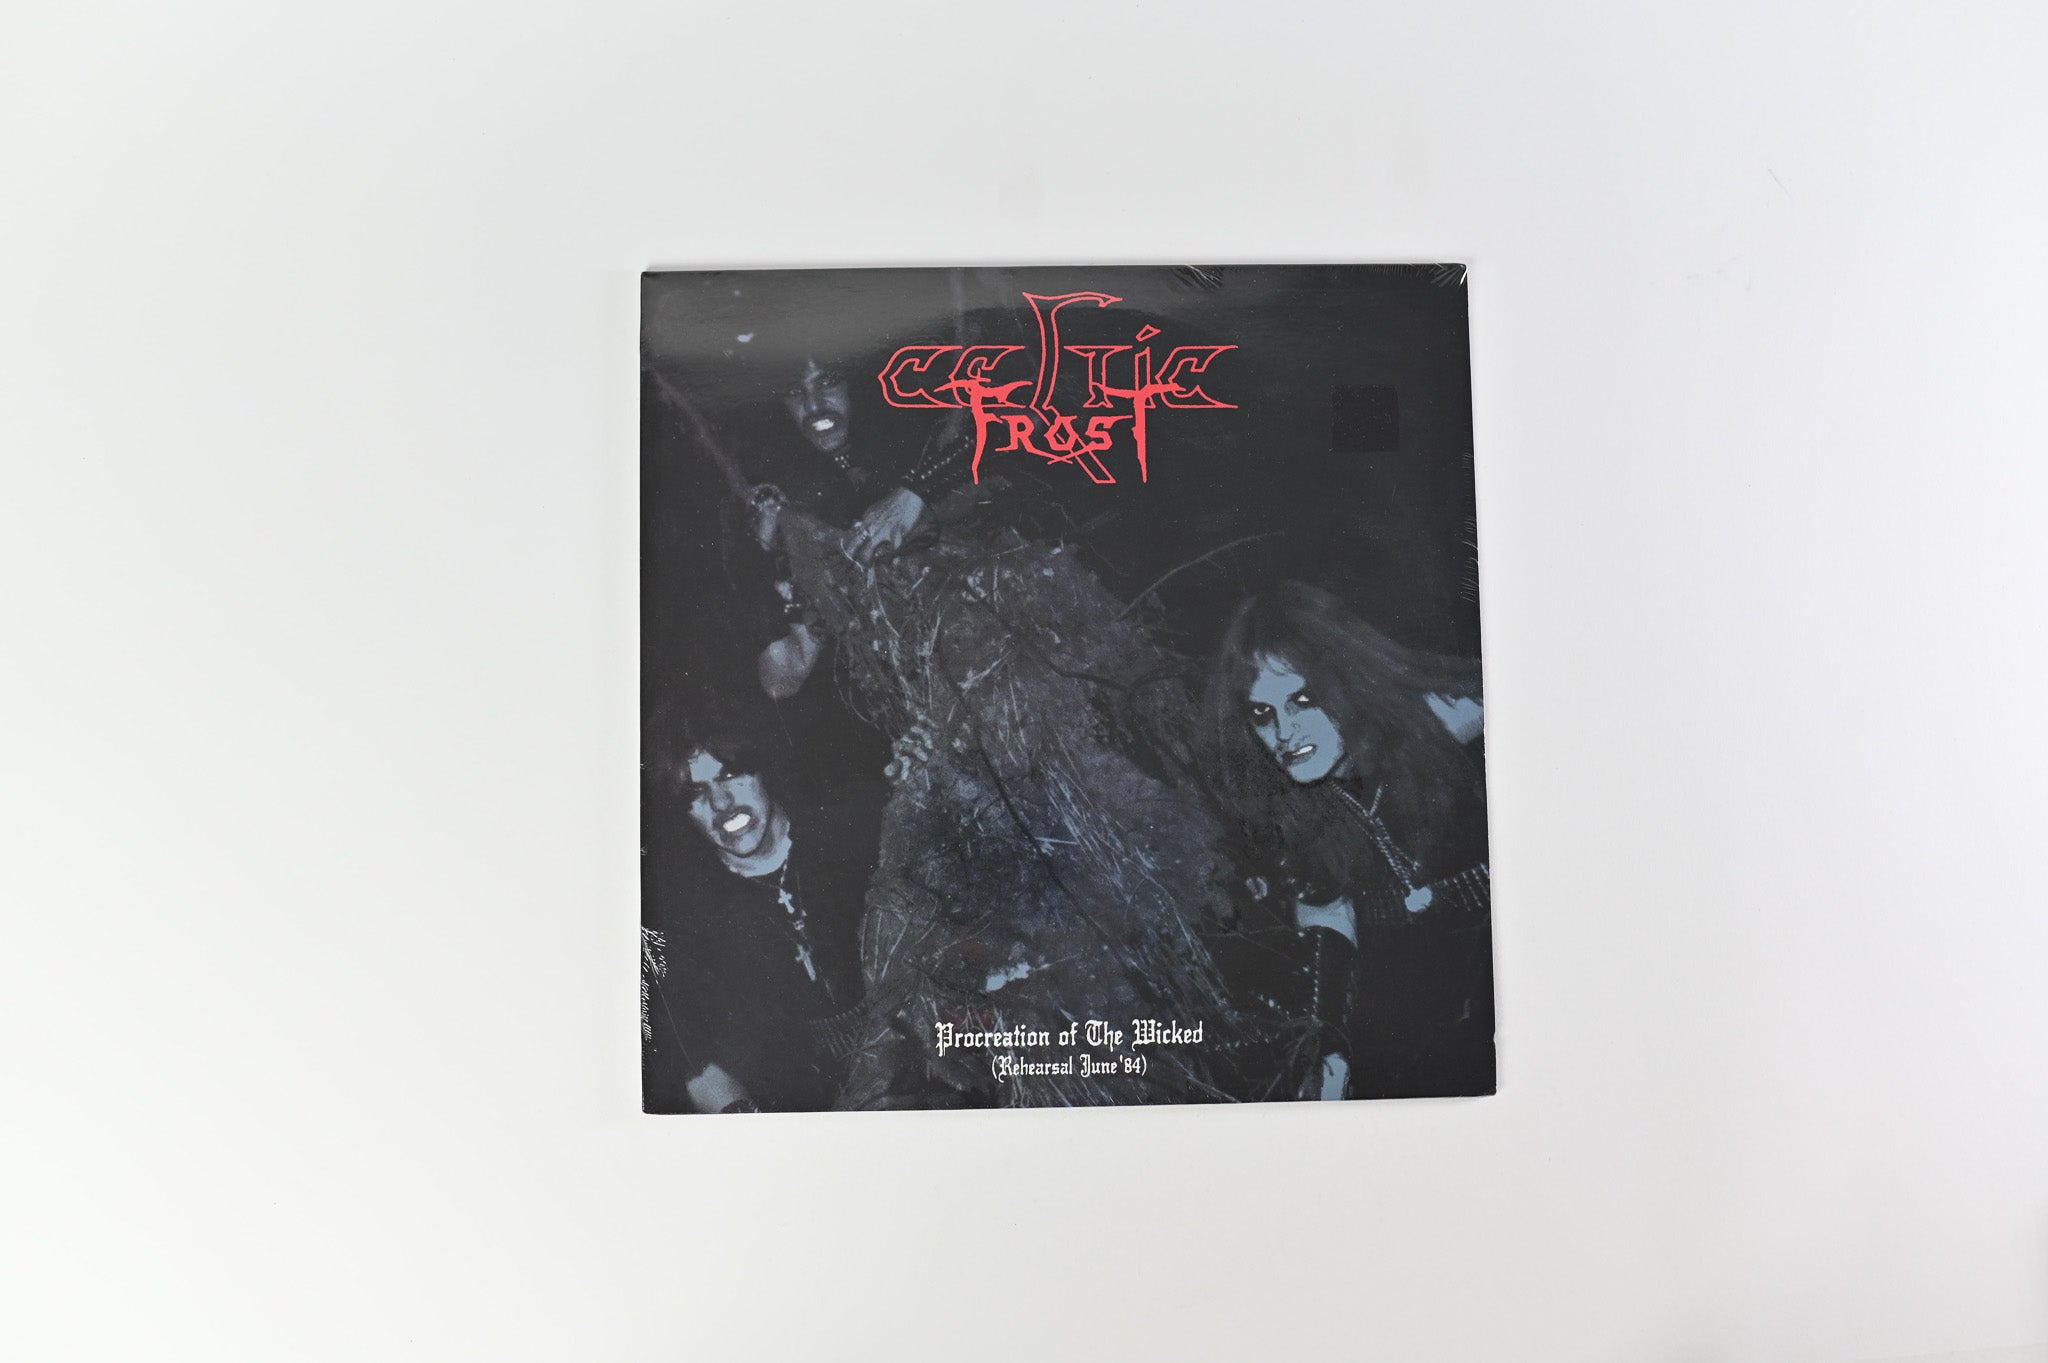 Celtic Frost - Procreation Of The Wicked (Rehearsal June '84) SEALED Unofficial Release on Mortal Shock Records